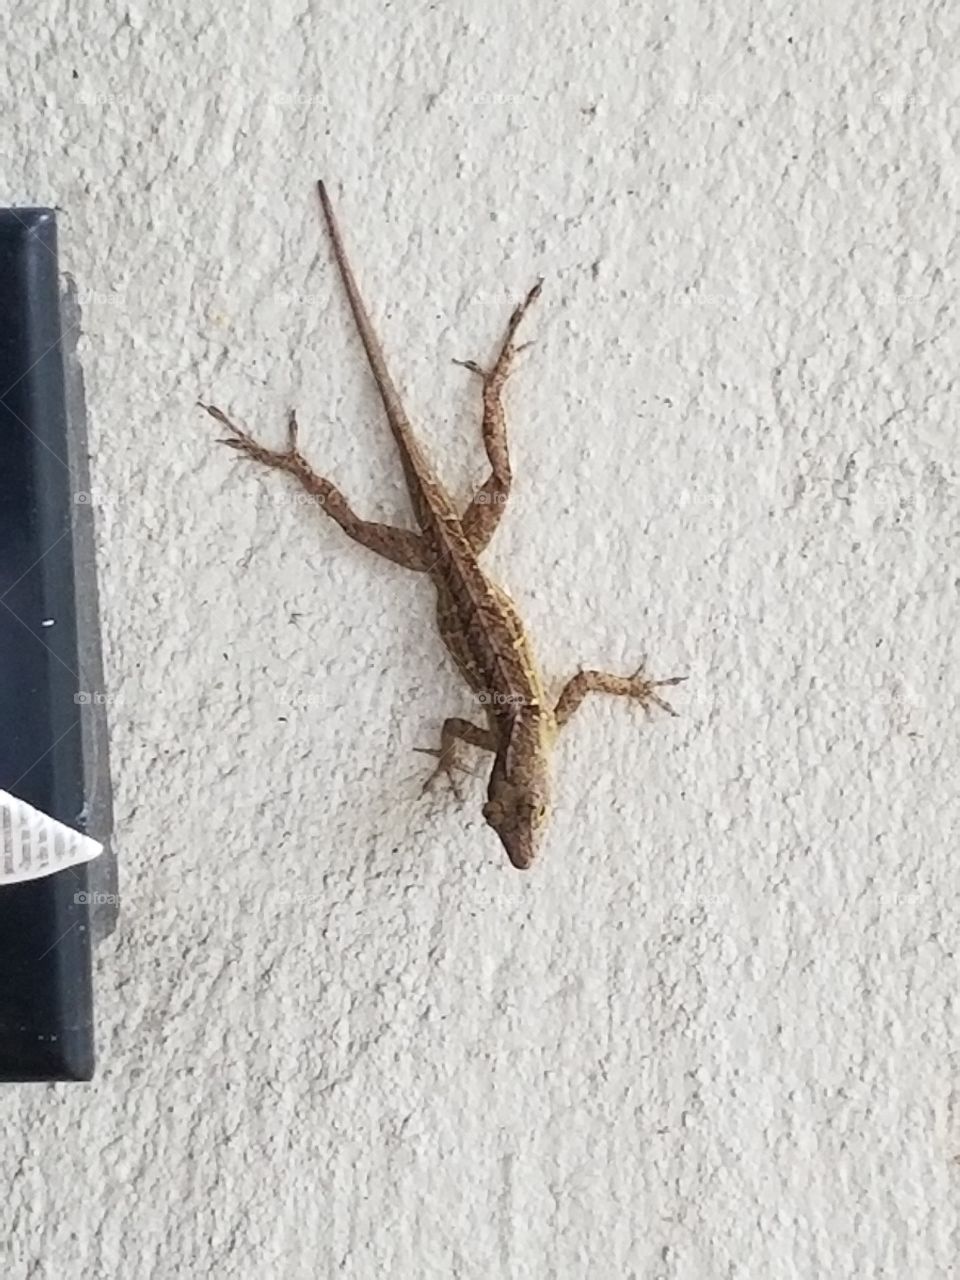 Chilling on the wall.  SoFlo Lizard